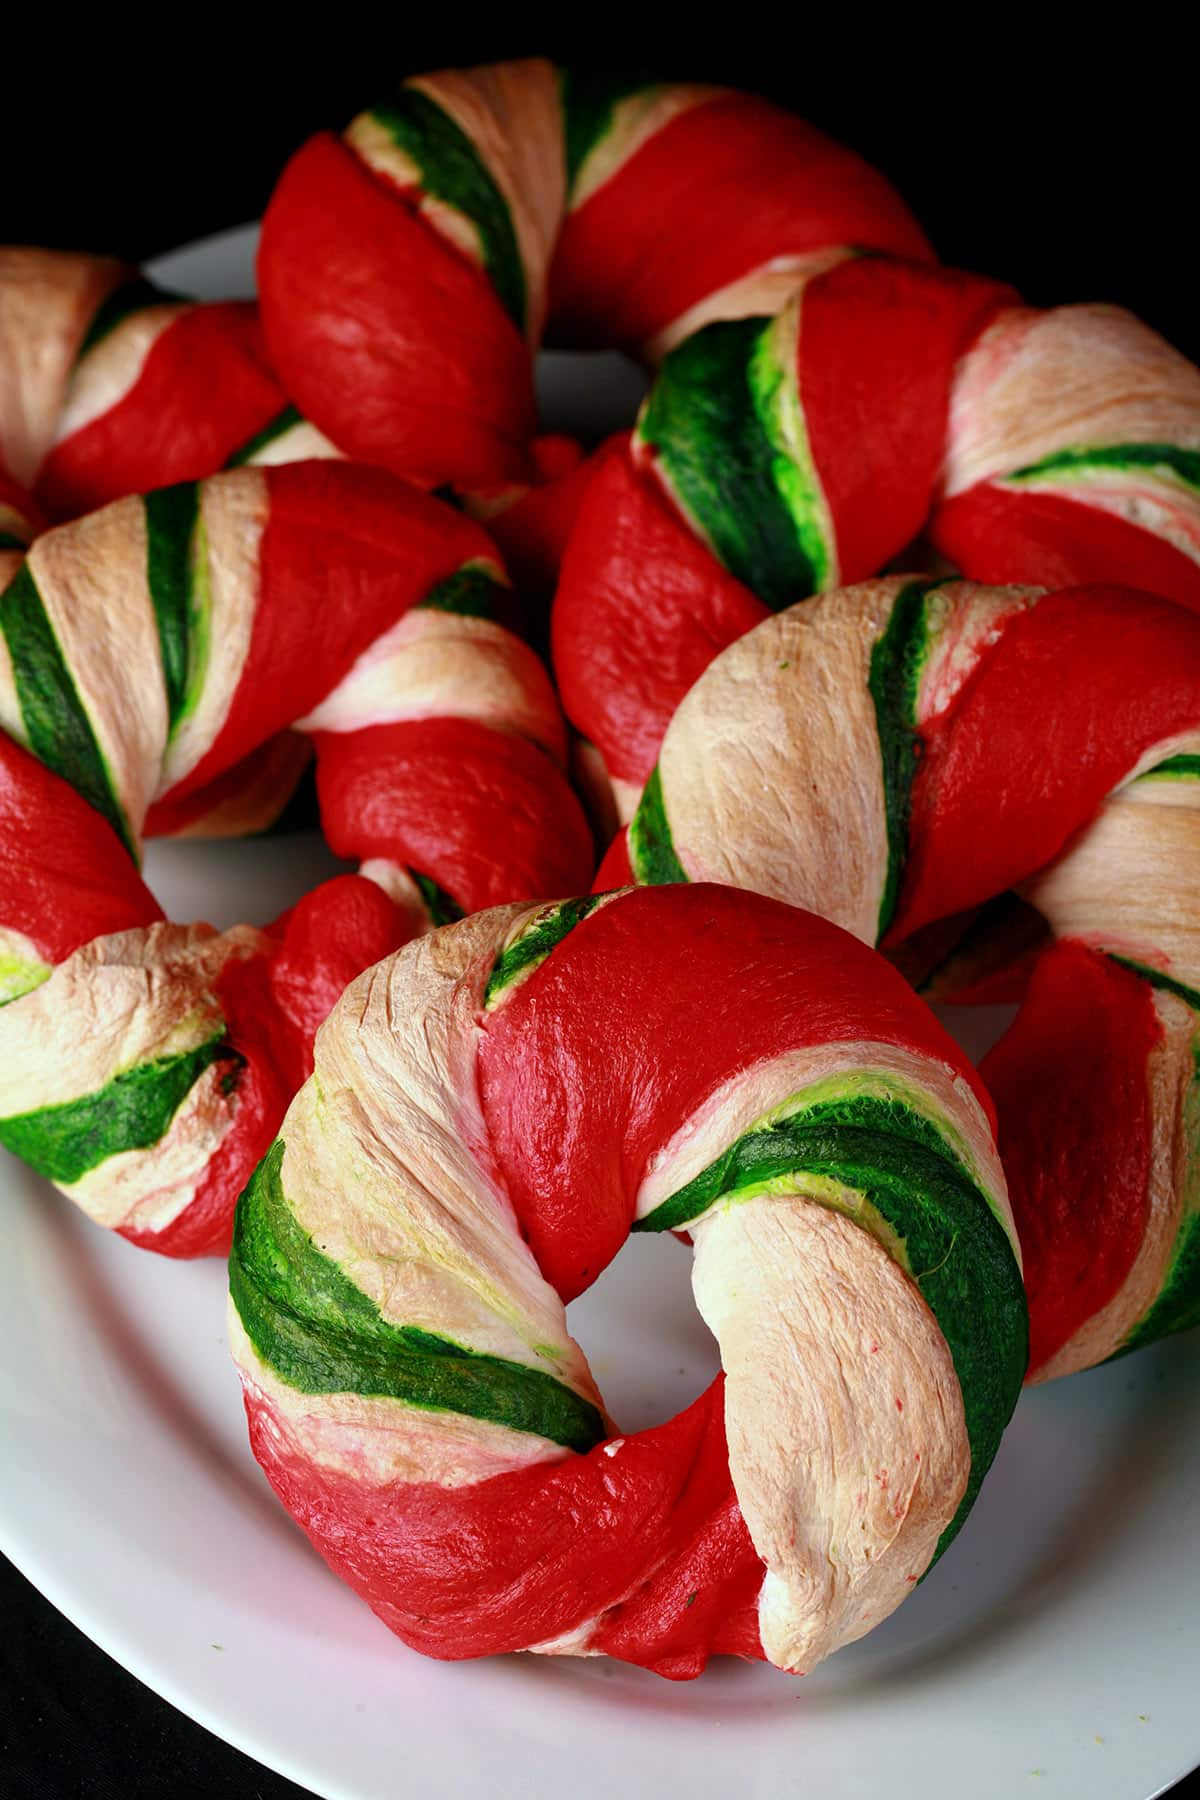 Several candy cane style Christmas bagels on a plate.